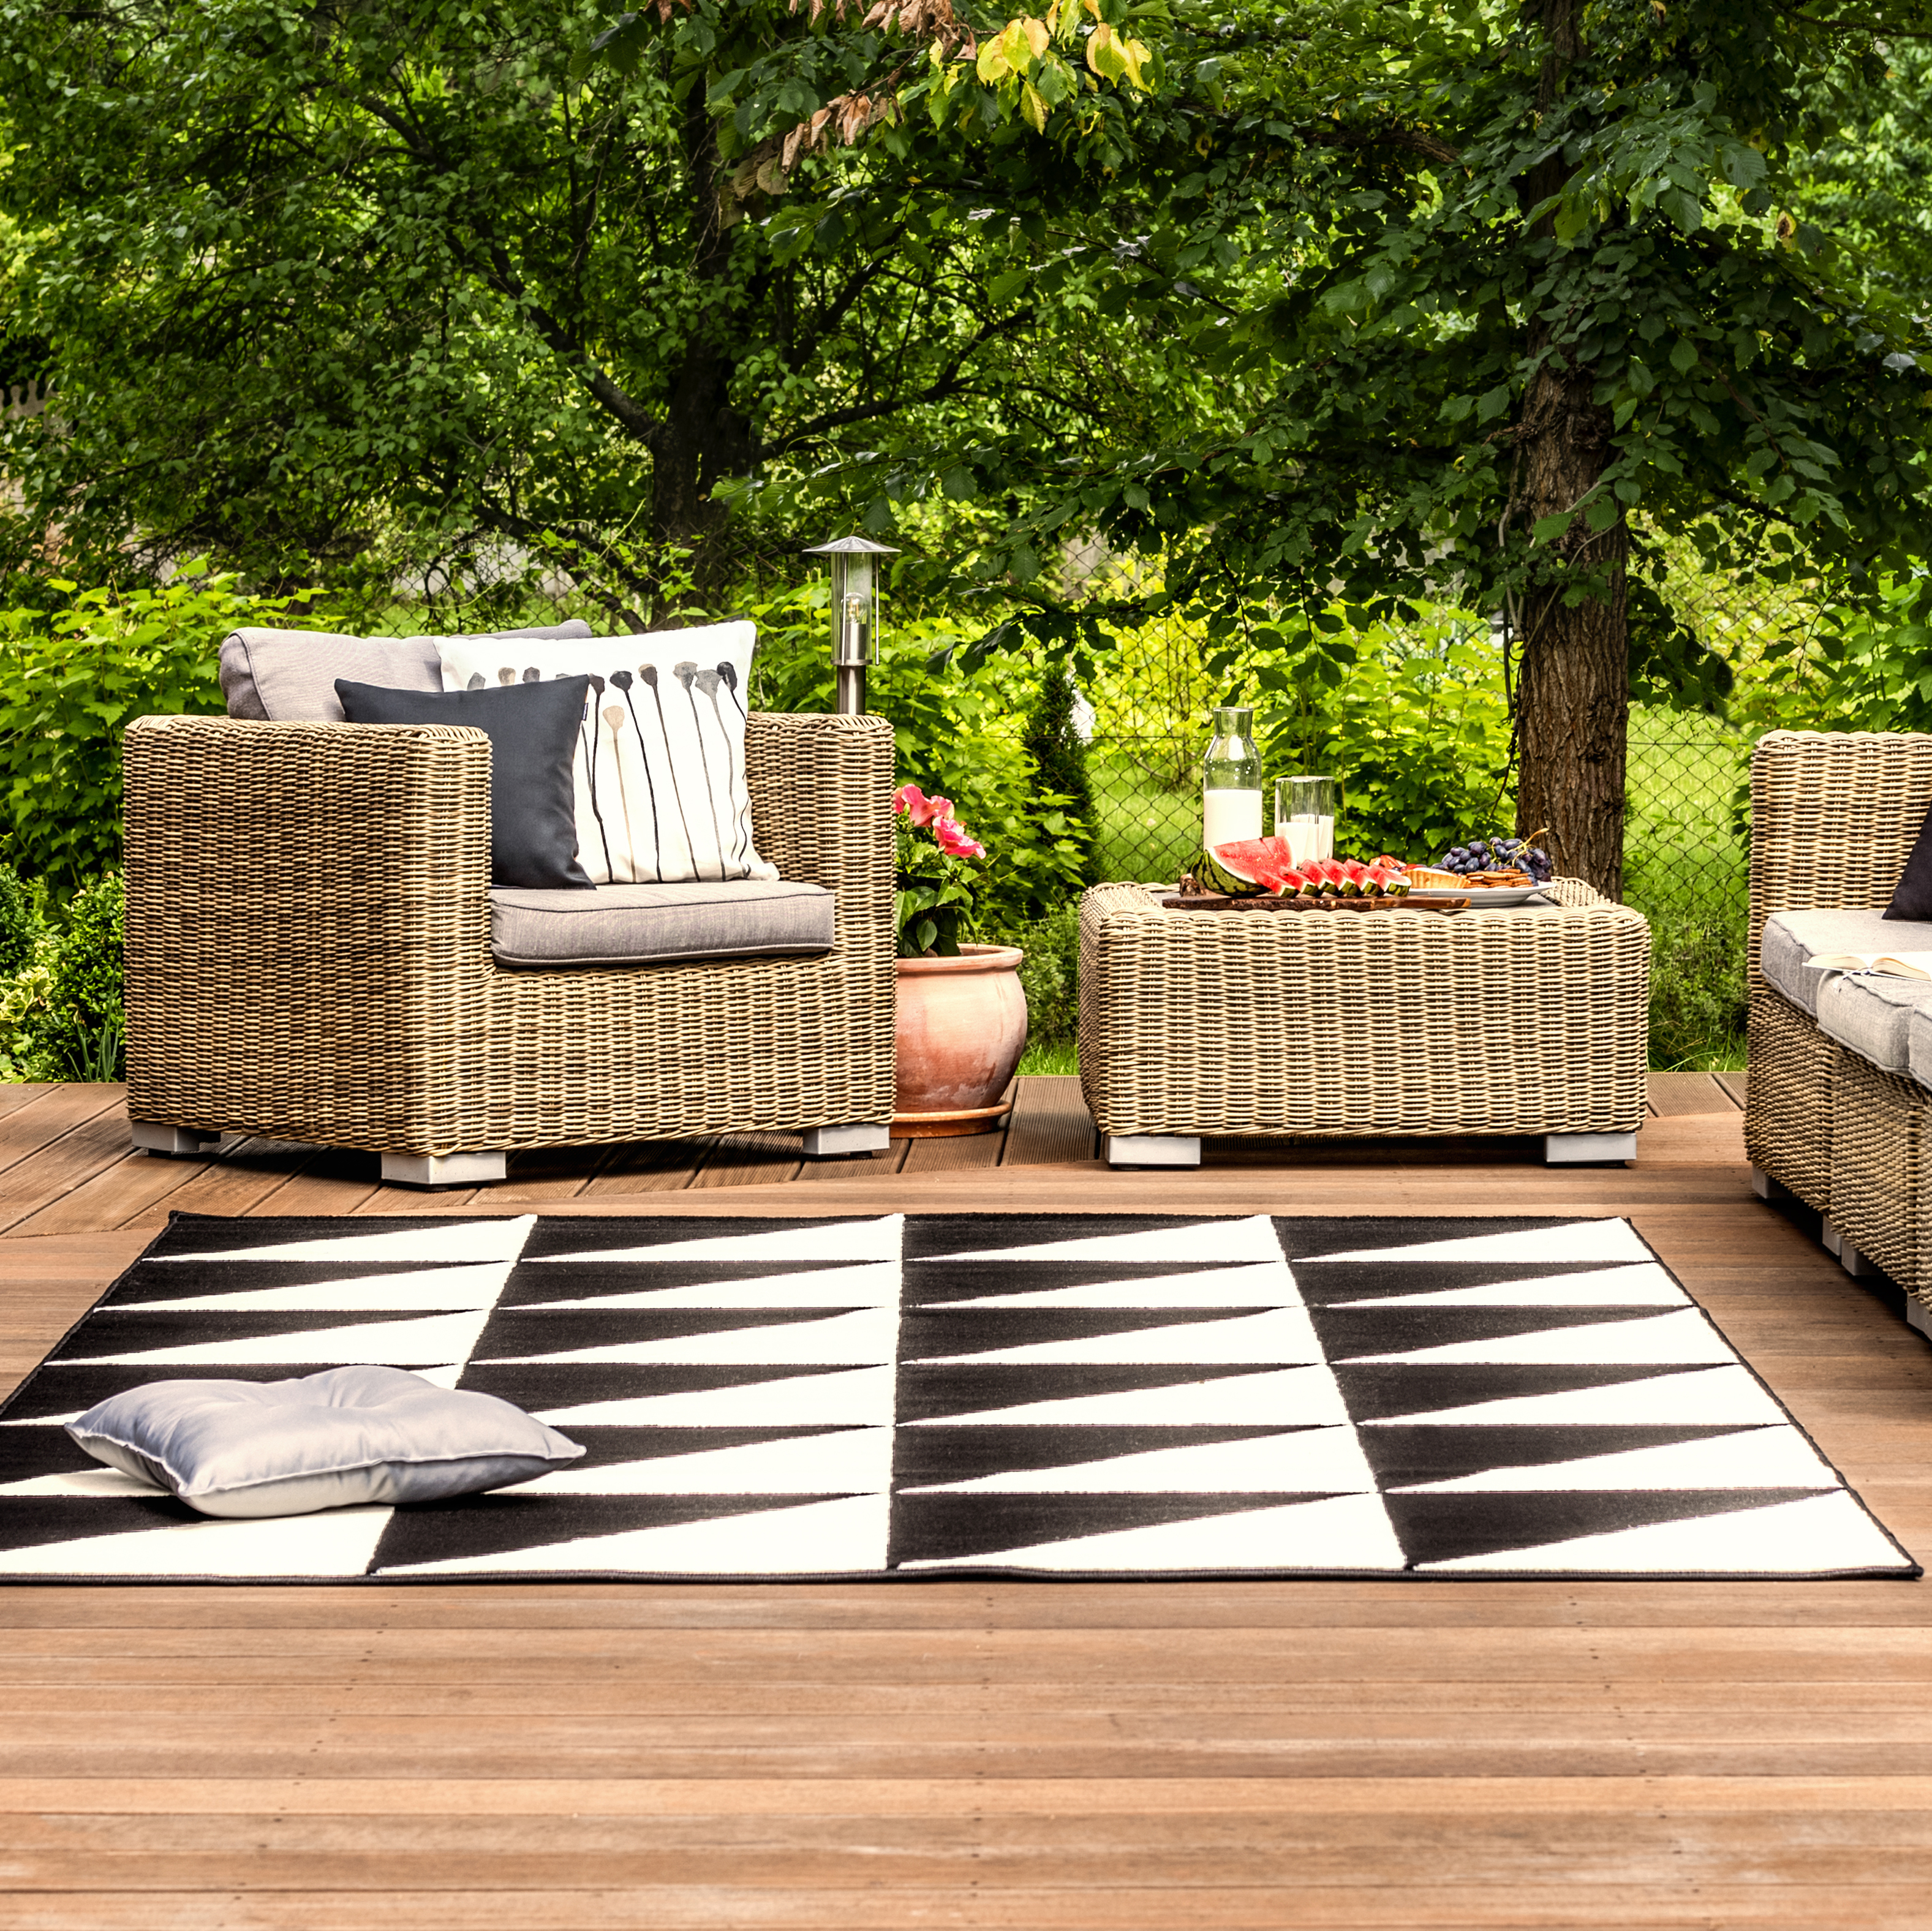 deck with outdoor furniture and black and white outdoor area rug